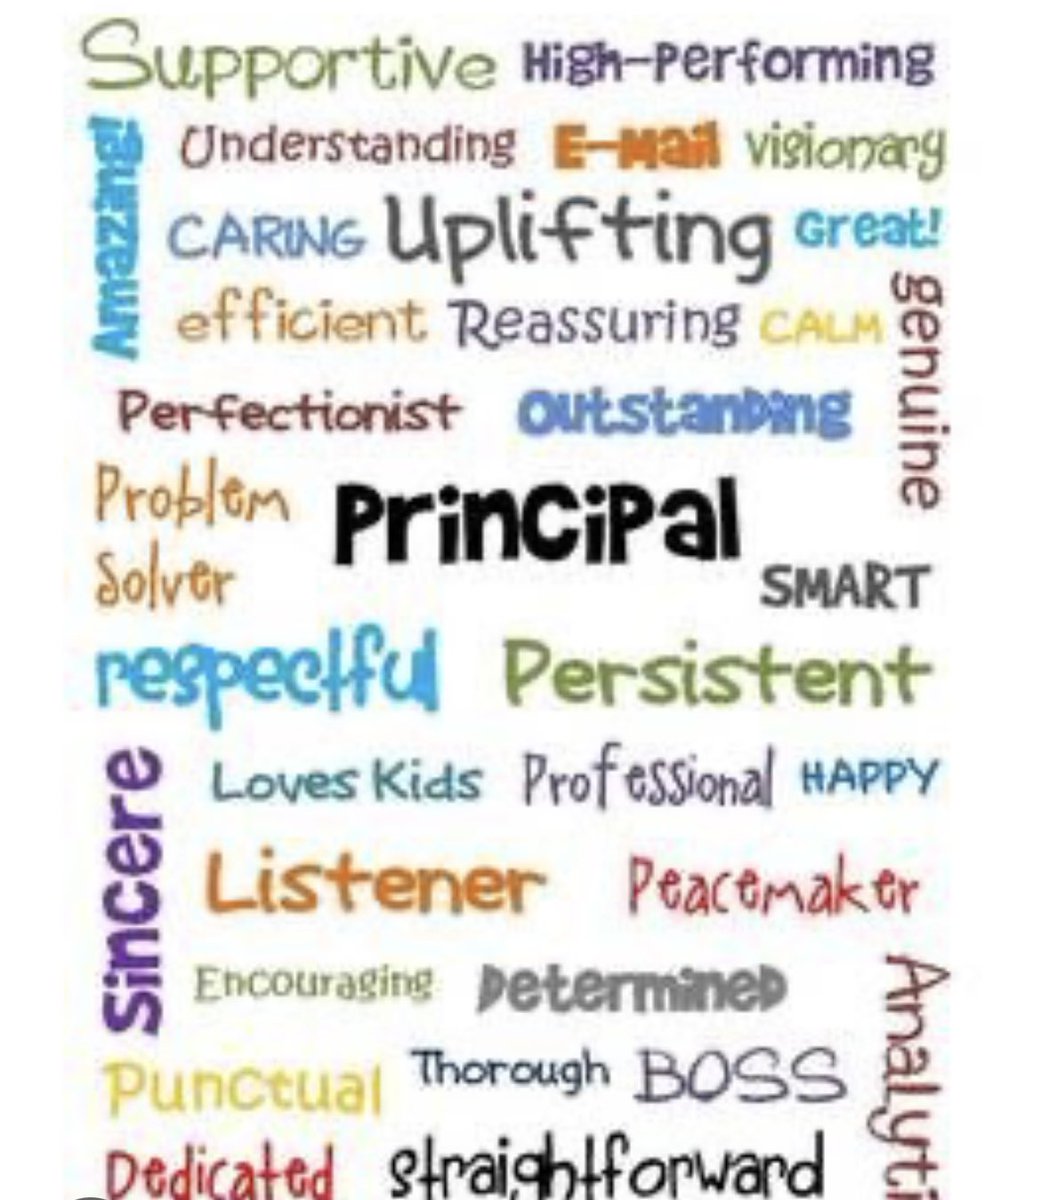 The 5th grade @PS66JKO is wishing our amazing principal @desarioha Happy Principal’s Day! We appreciate all you do for our grade and entire school @501ps66